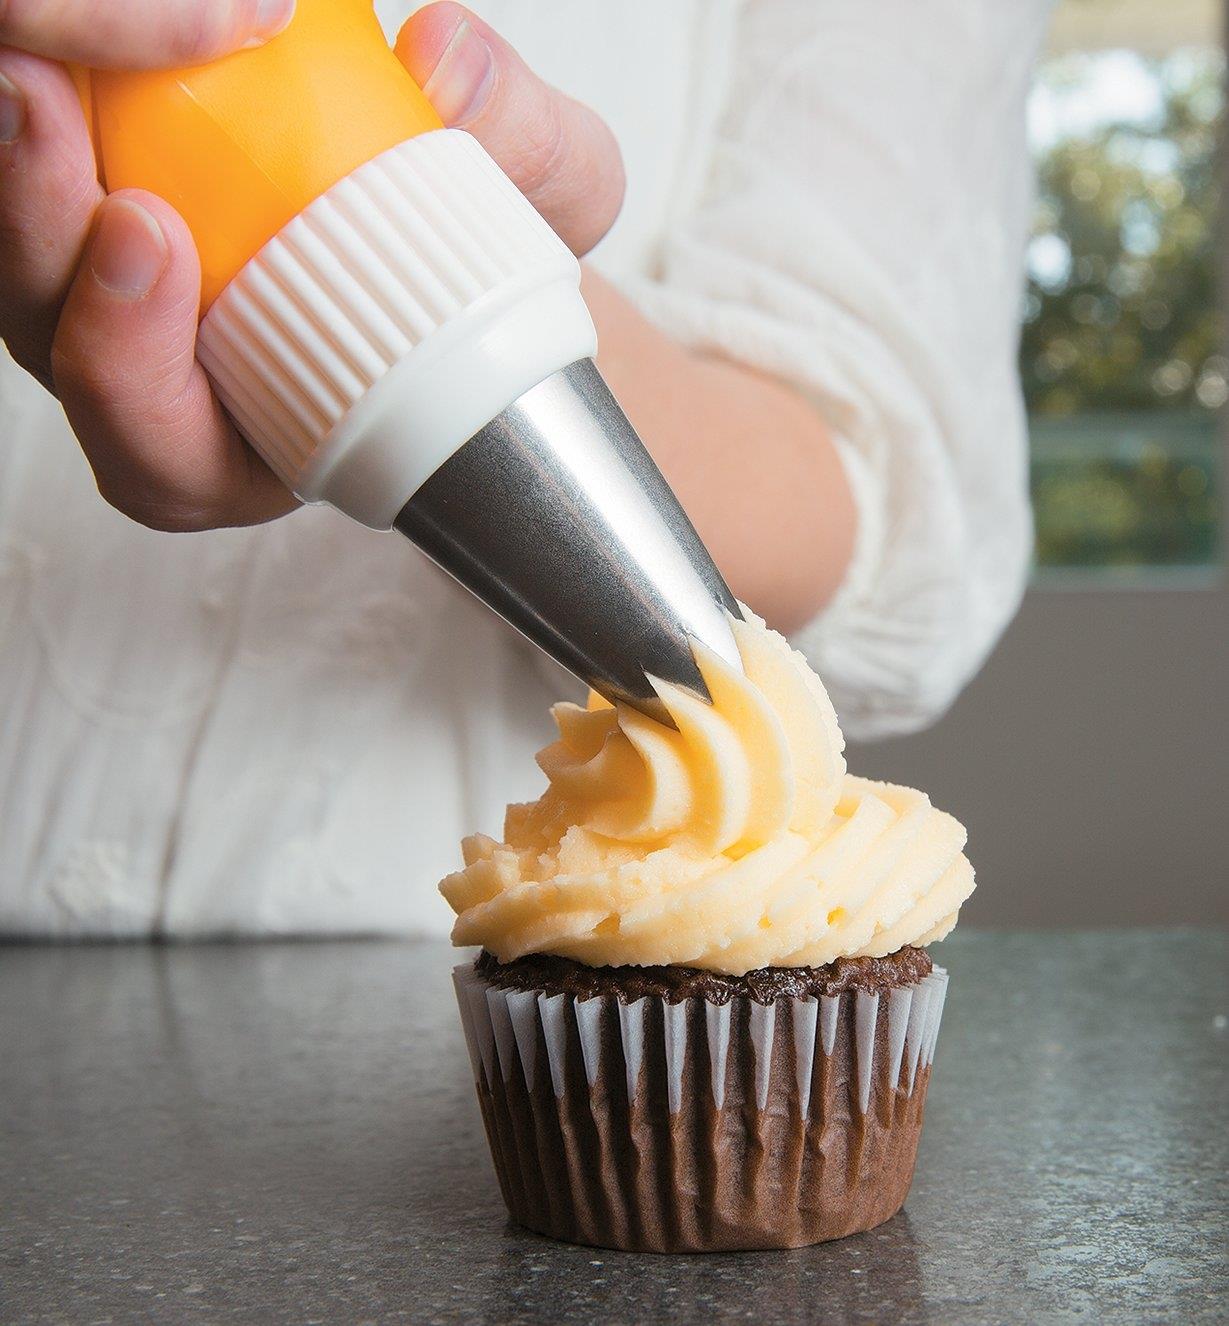 Frosting a cupcake with a silicone Piping Bag and decorating tip